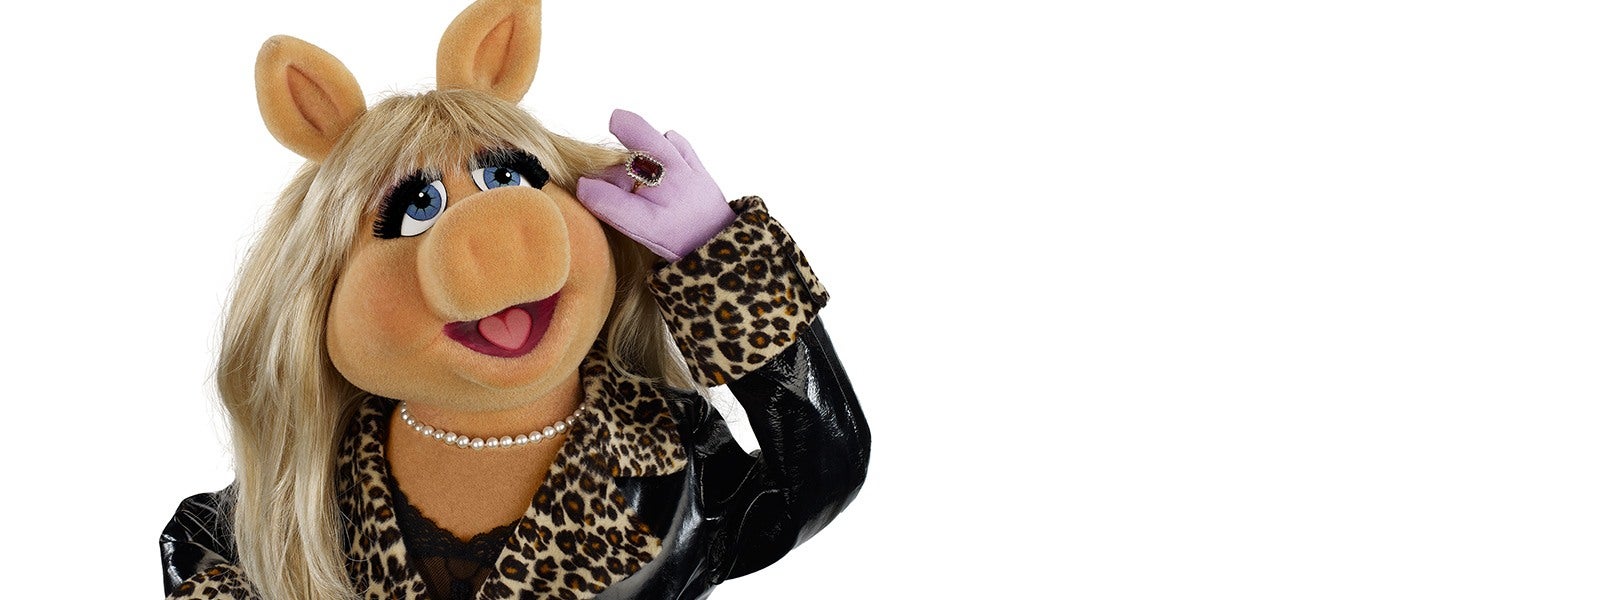 The Muppets: A Tail of Two Piggies Review